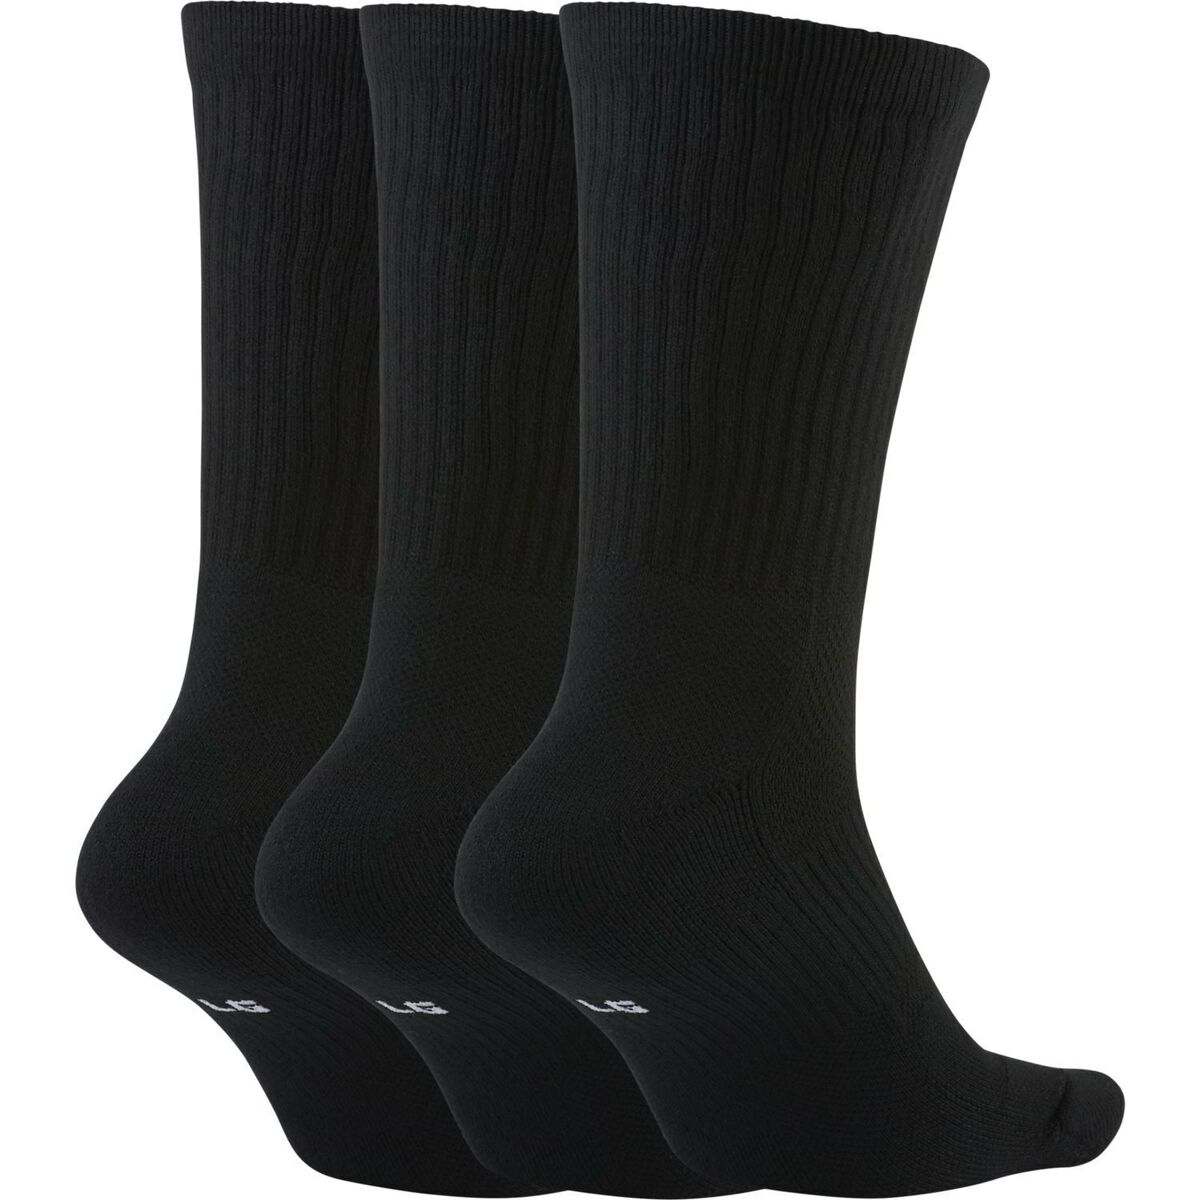 Nike Noir Chaussettes Crew Basketball 3 Paires oHFgDWy1